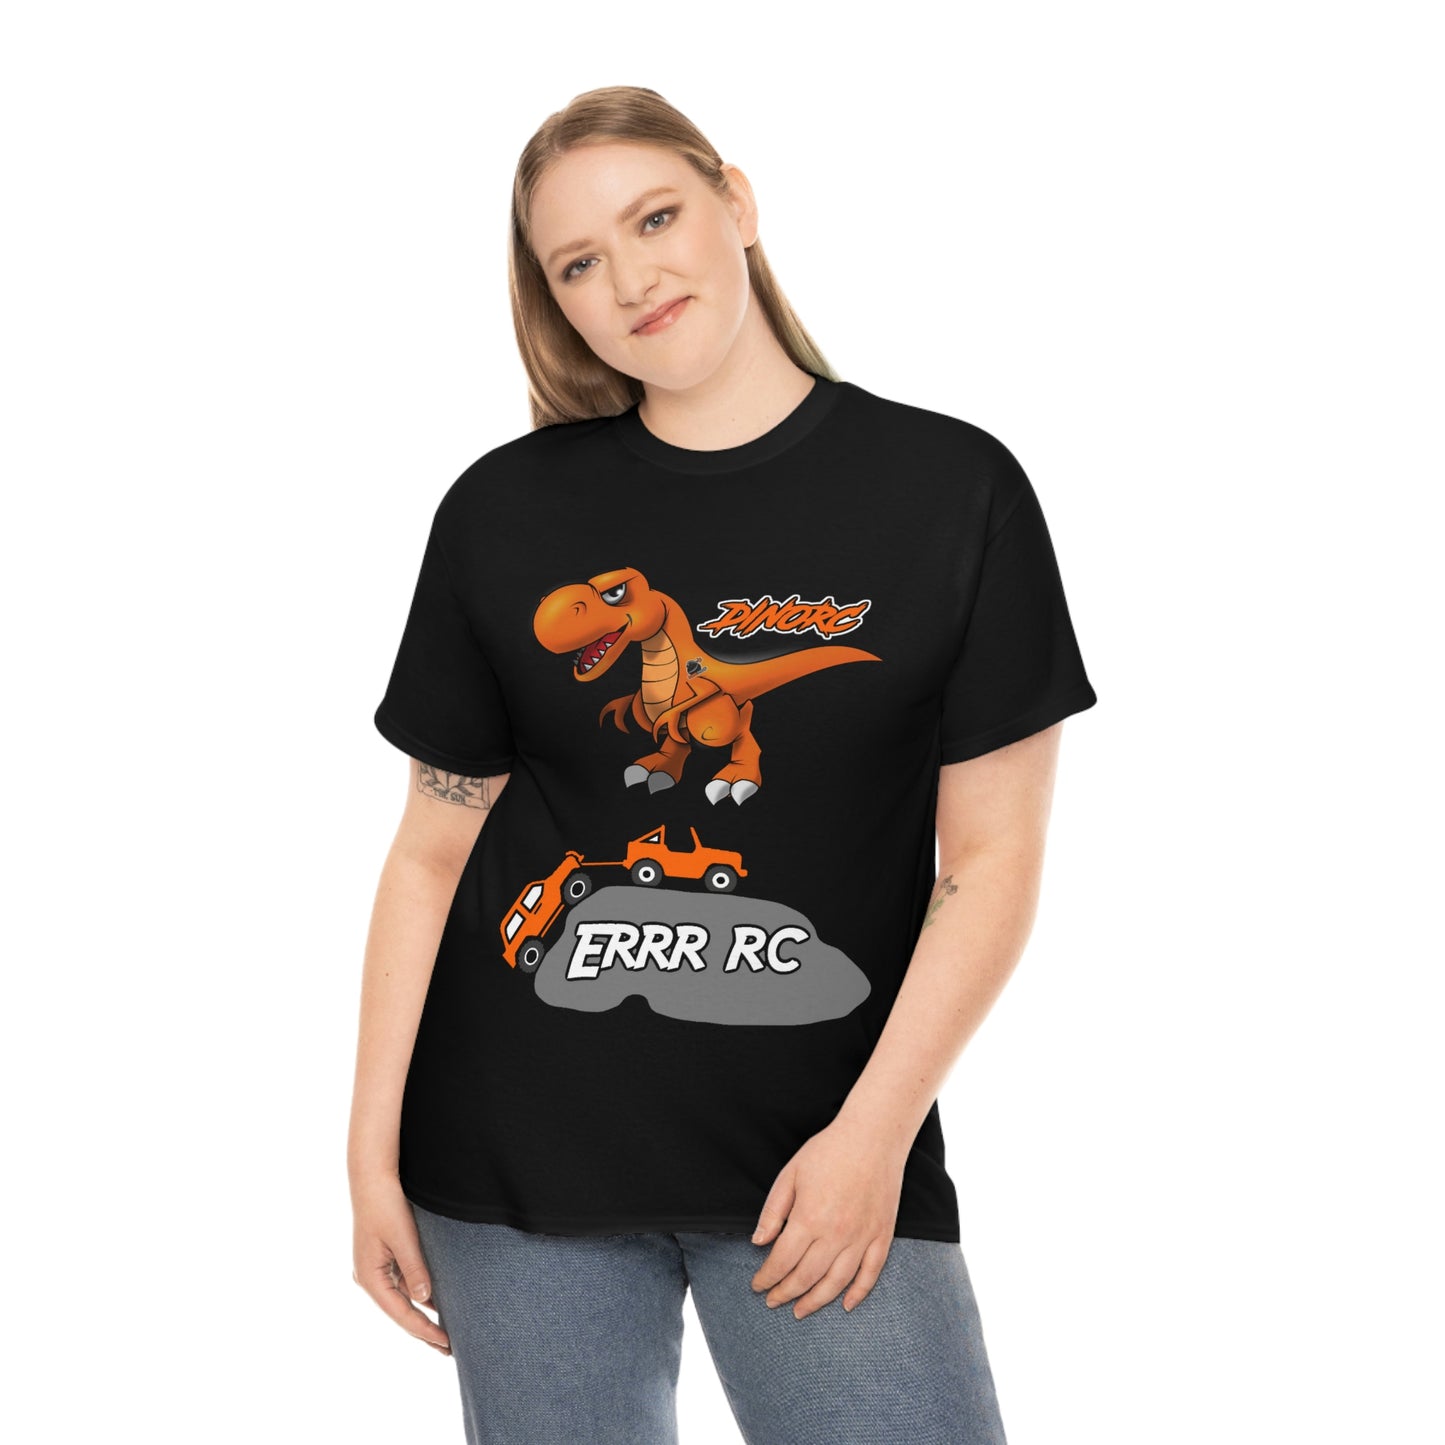 Donnie Hinkle DinoRC Team Driver ERRR RC  Front and Back DinoRc Logo T-Shirt S-5x 5 colors